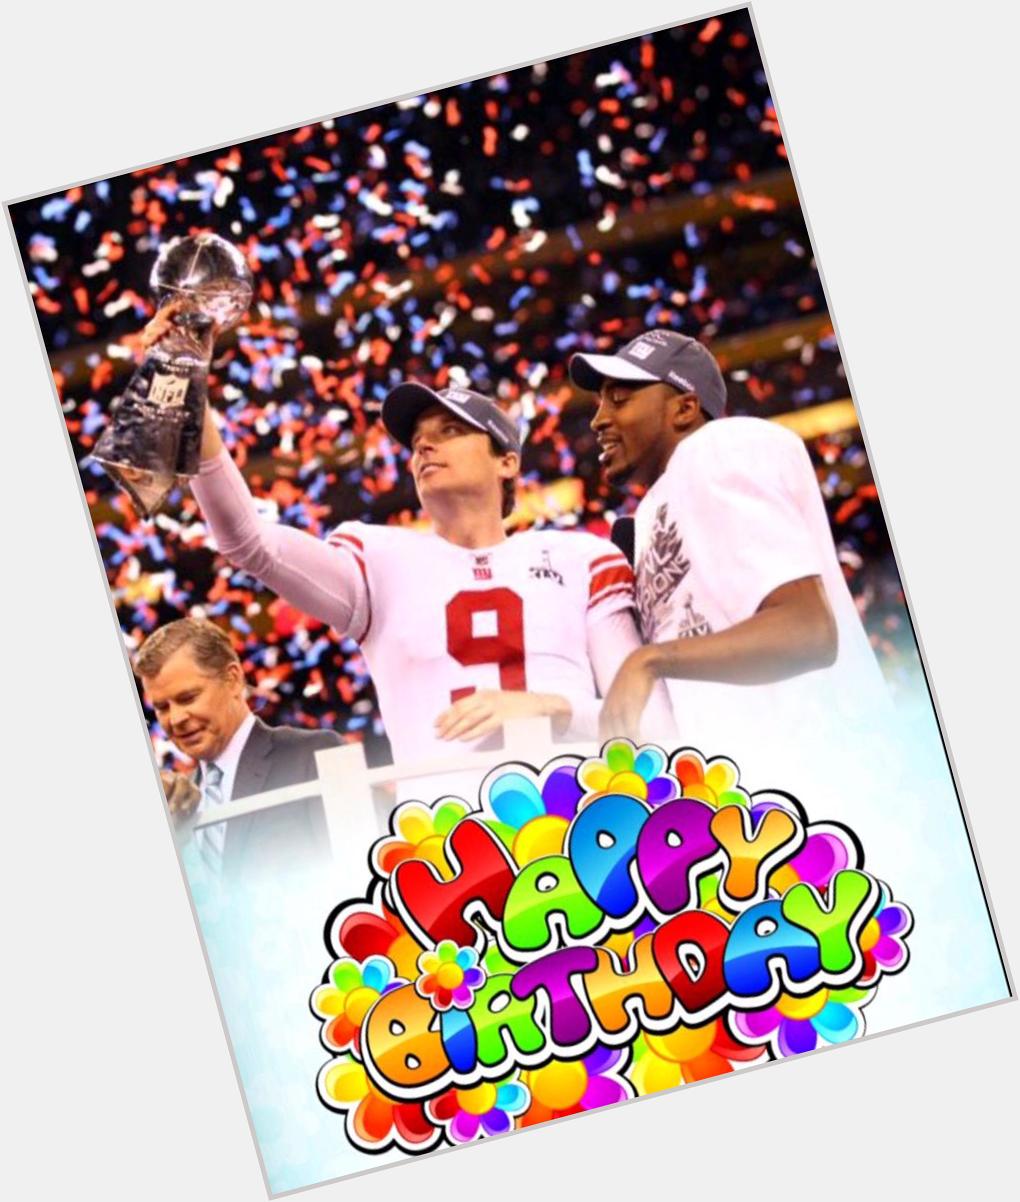 Happy Birthday to Lawrence Tynes! Over his football career he has played in Europe, CFL and NFL, he has two SB rings! 